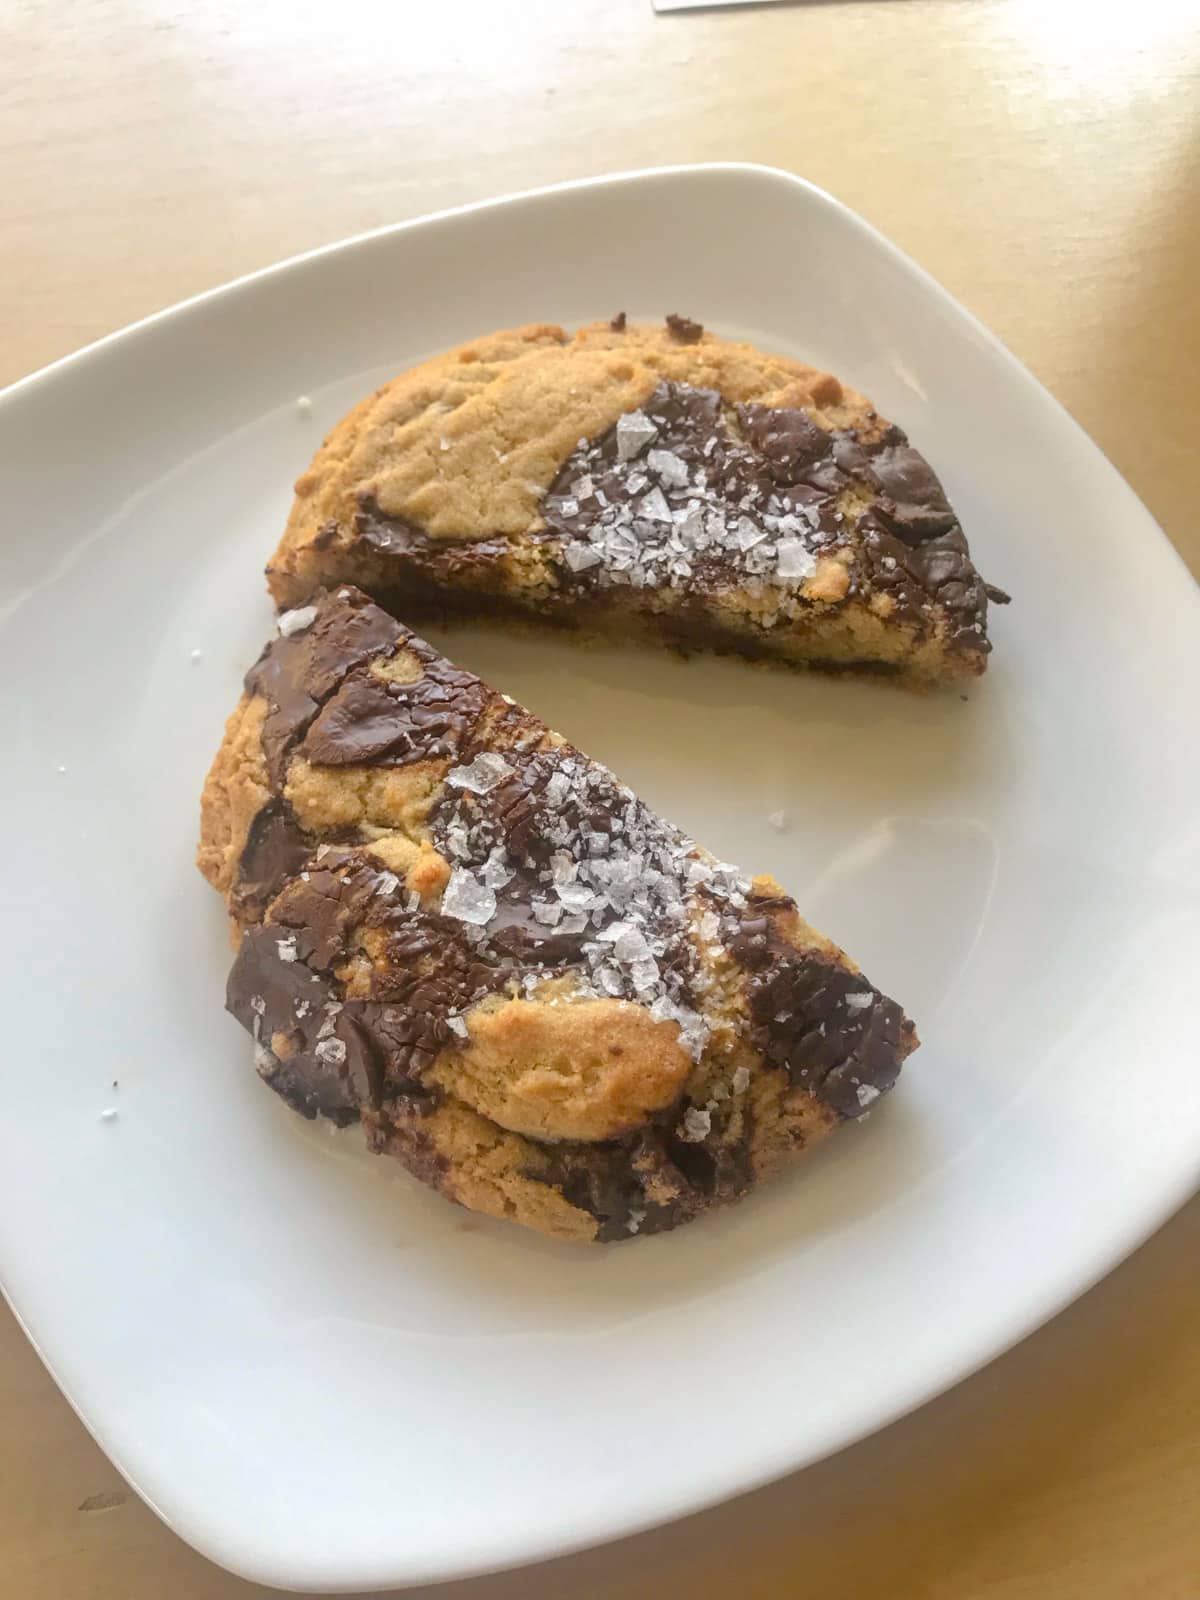 A chocolate chip and sea salt cookie on a plate, cut in half